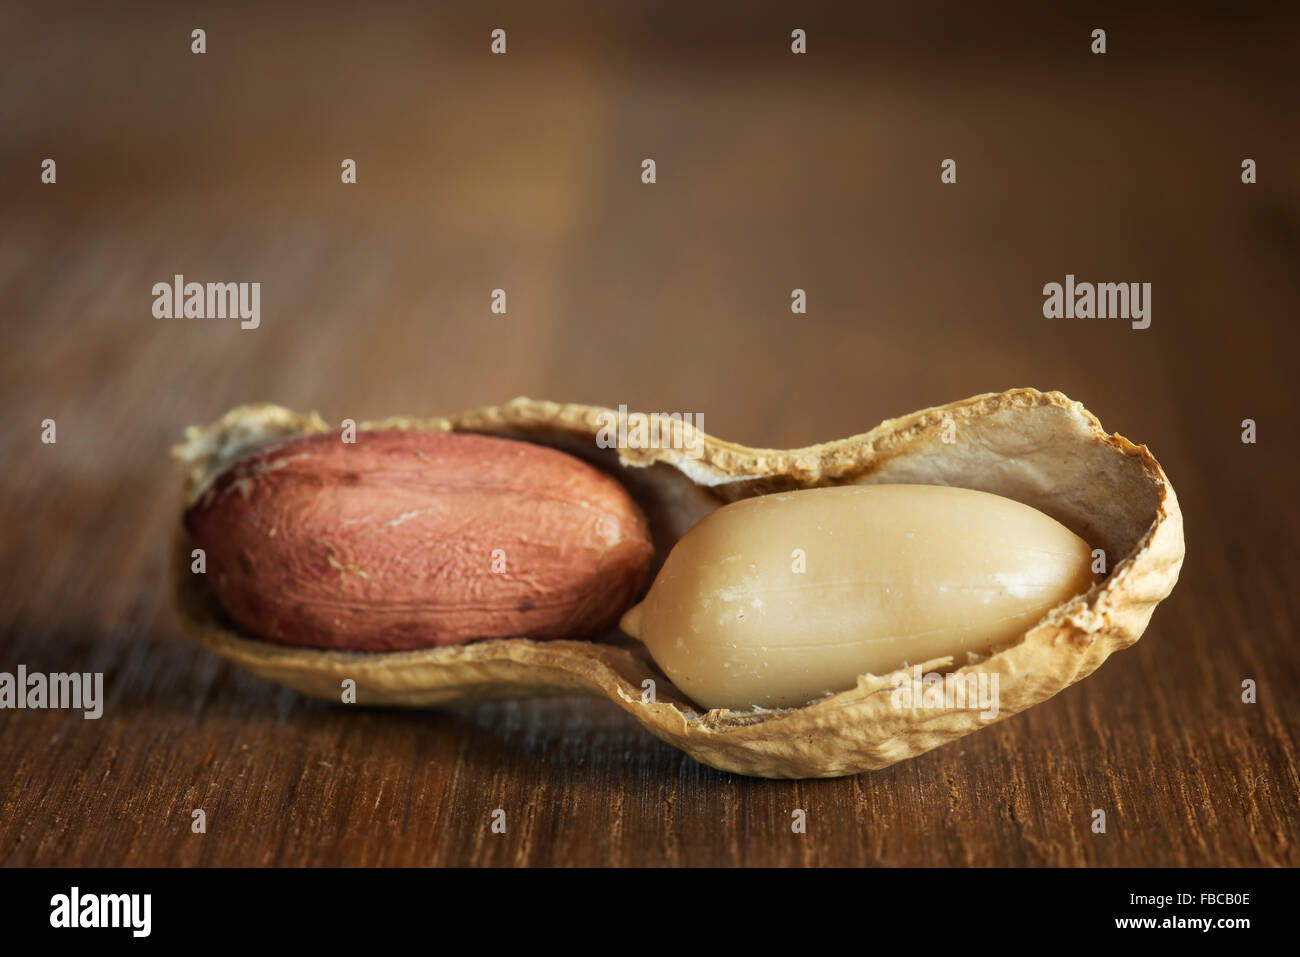 Peanut shelled and unshelled on a wooden table Stock Photo